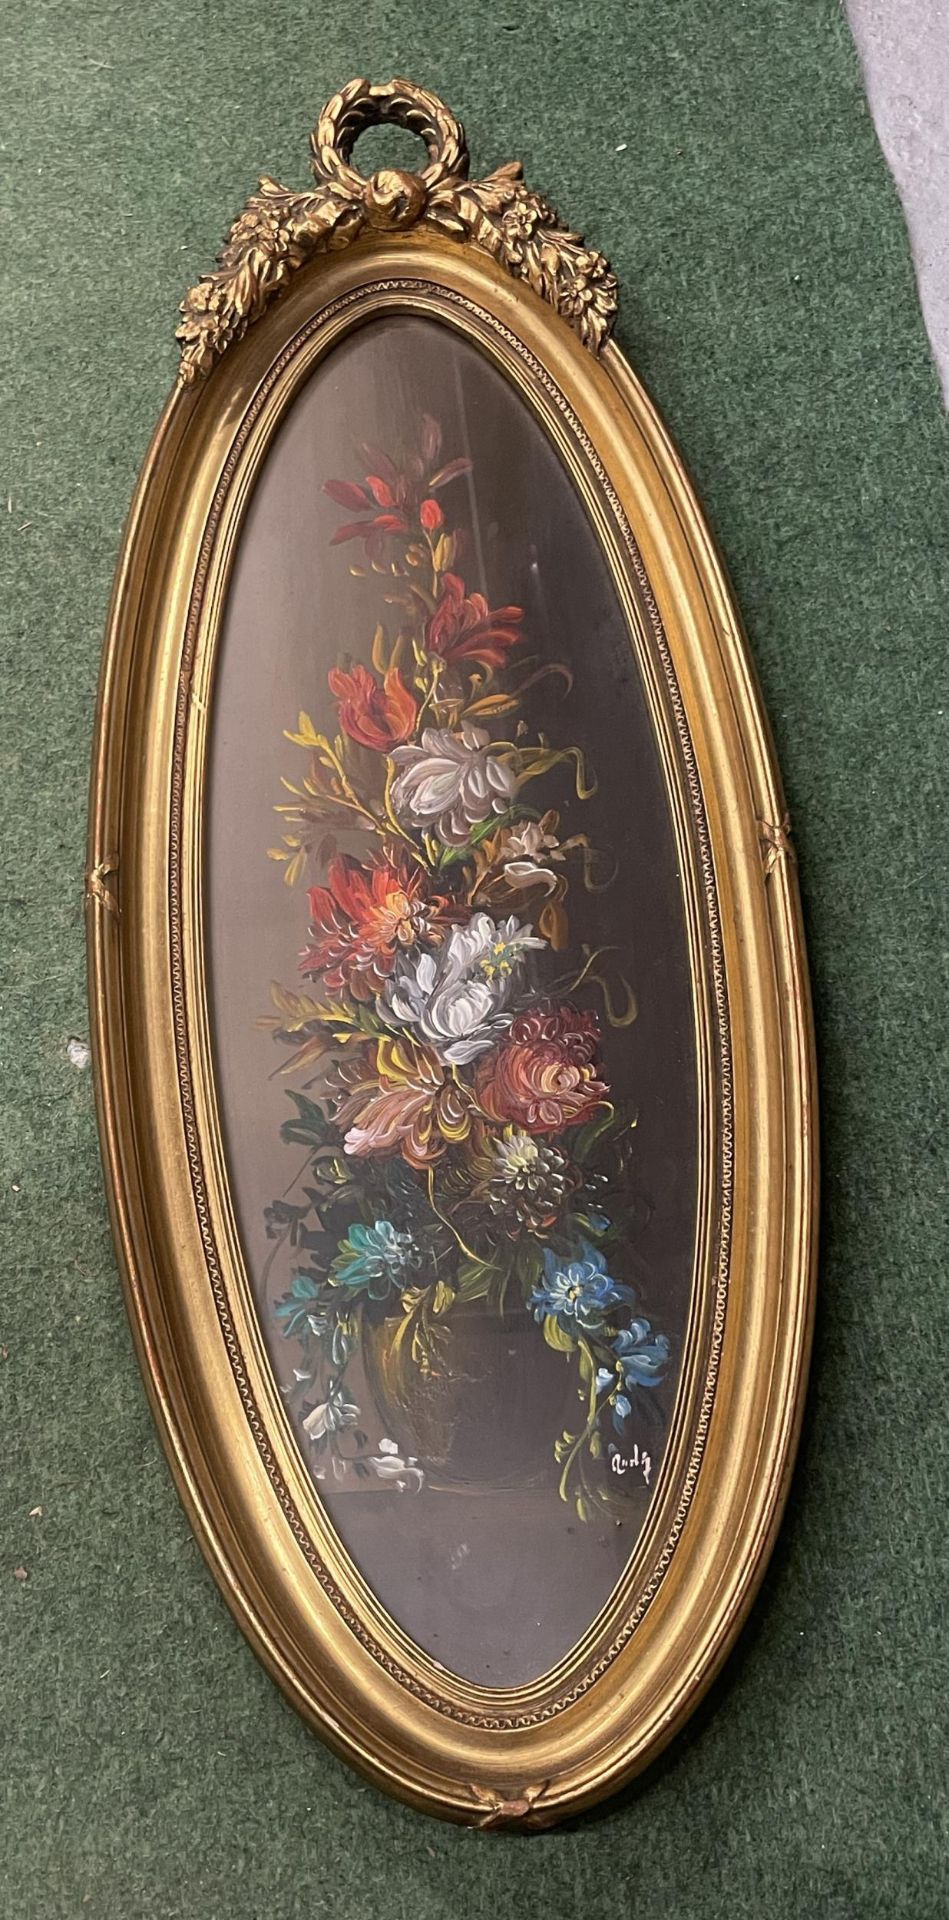 A GILT FRAMED OIL ON CANVAS STILL LIFE PAINTING, INDISTINCTLY SIGNED